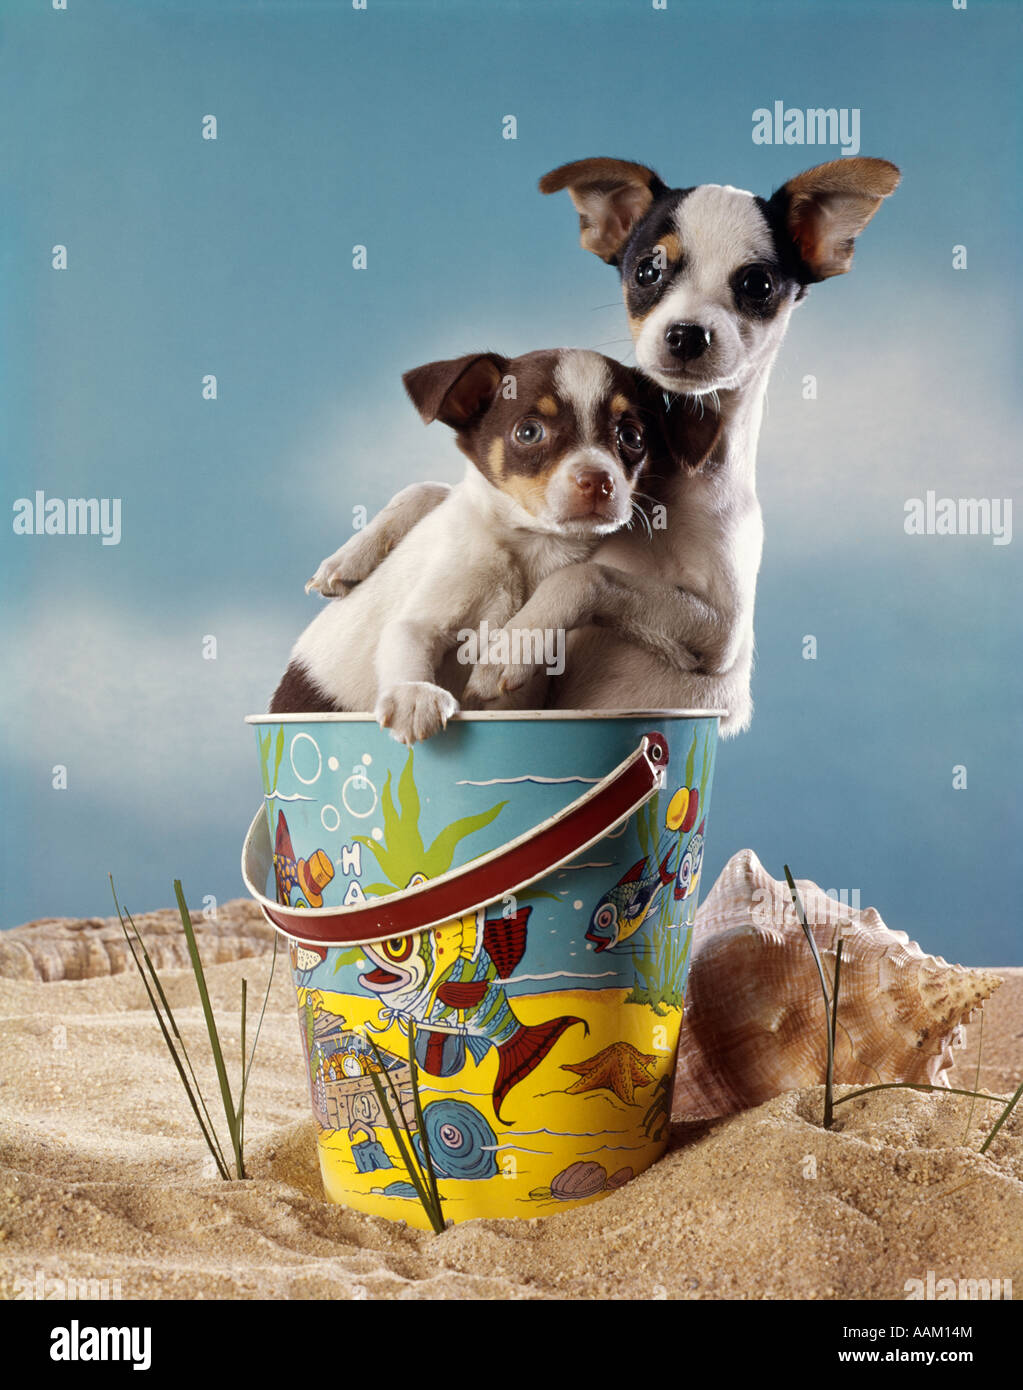 1970s TWO MINIATURE DOGS CHIHUAHUA IN A BEACH SAND PAIL Stock Photo